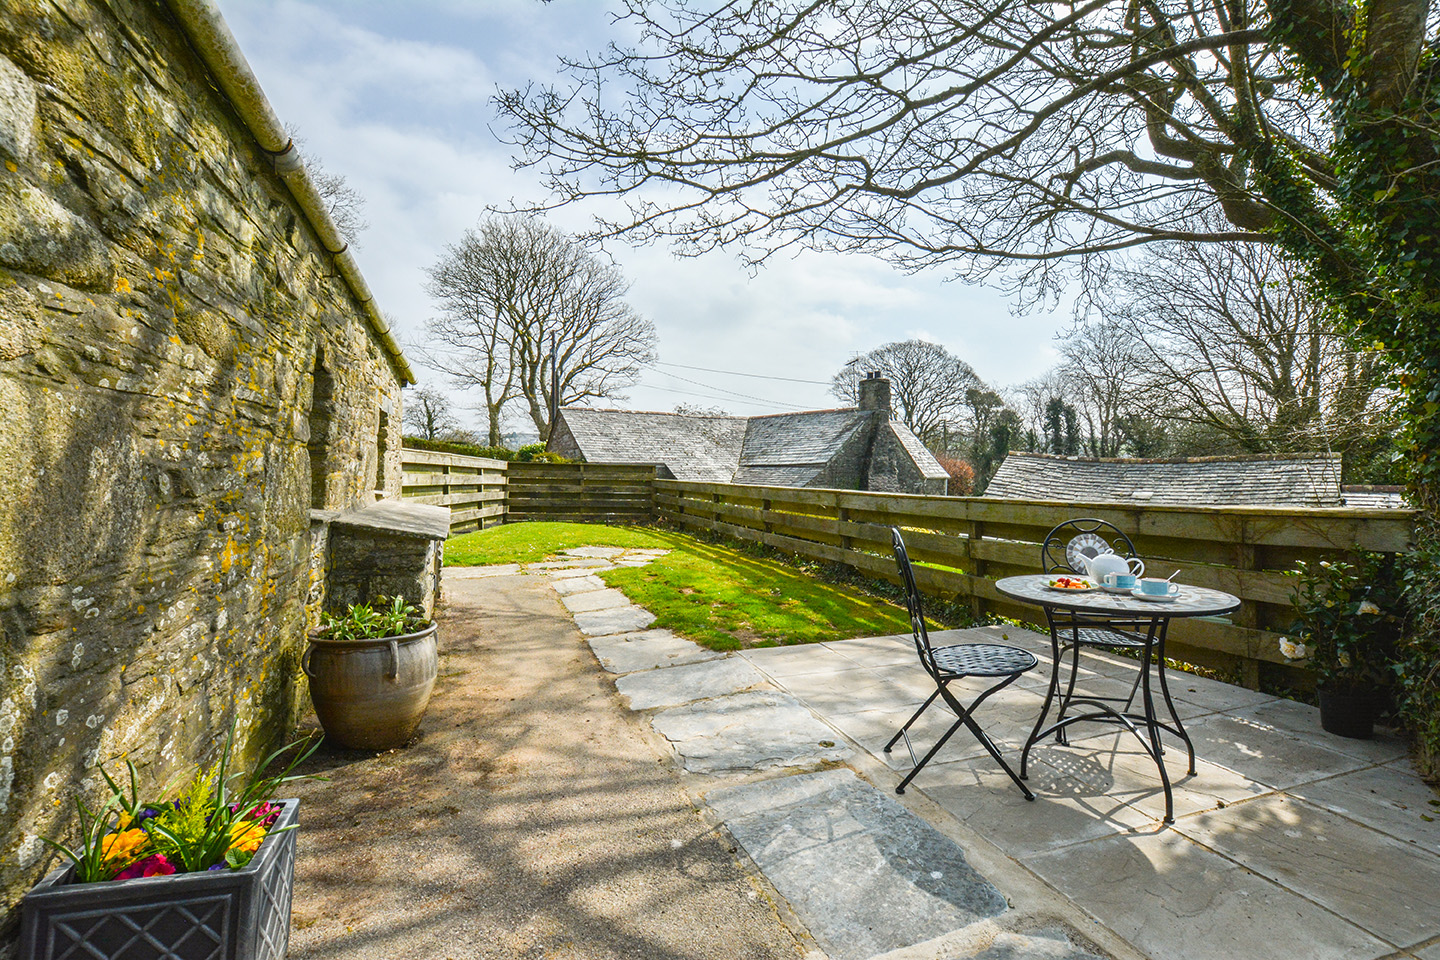 The garden at Jingles luxury self catering holiday cottage at Penrose Burden in North Cornwall near Bodmin Moor02.jpg